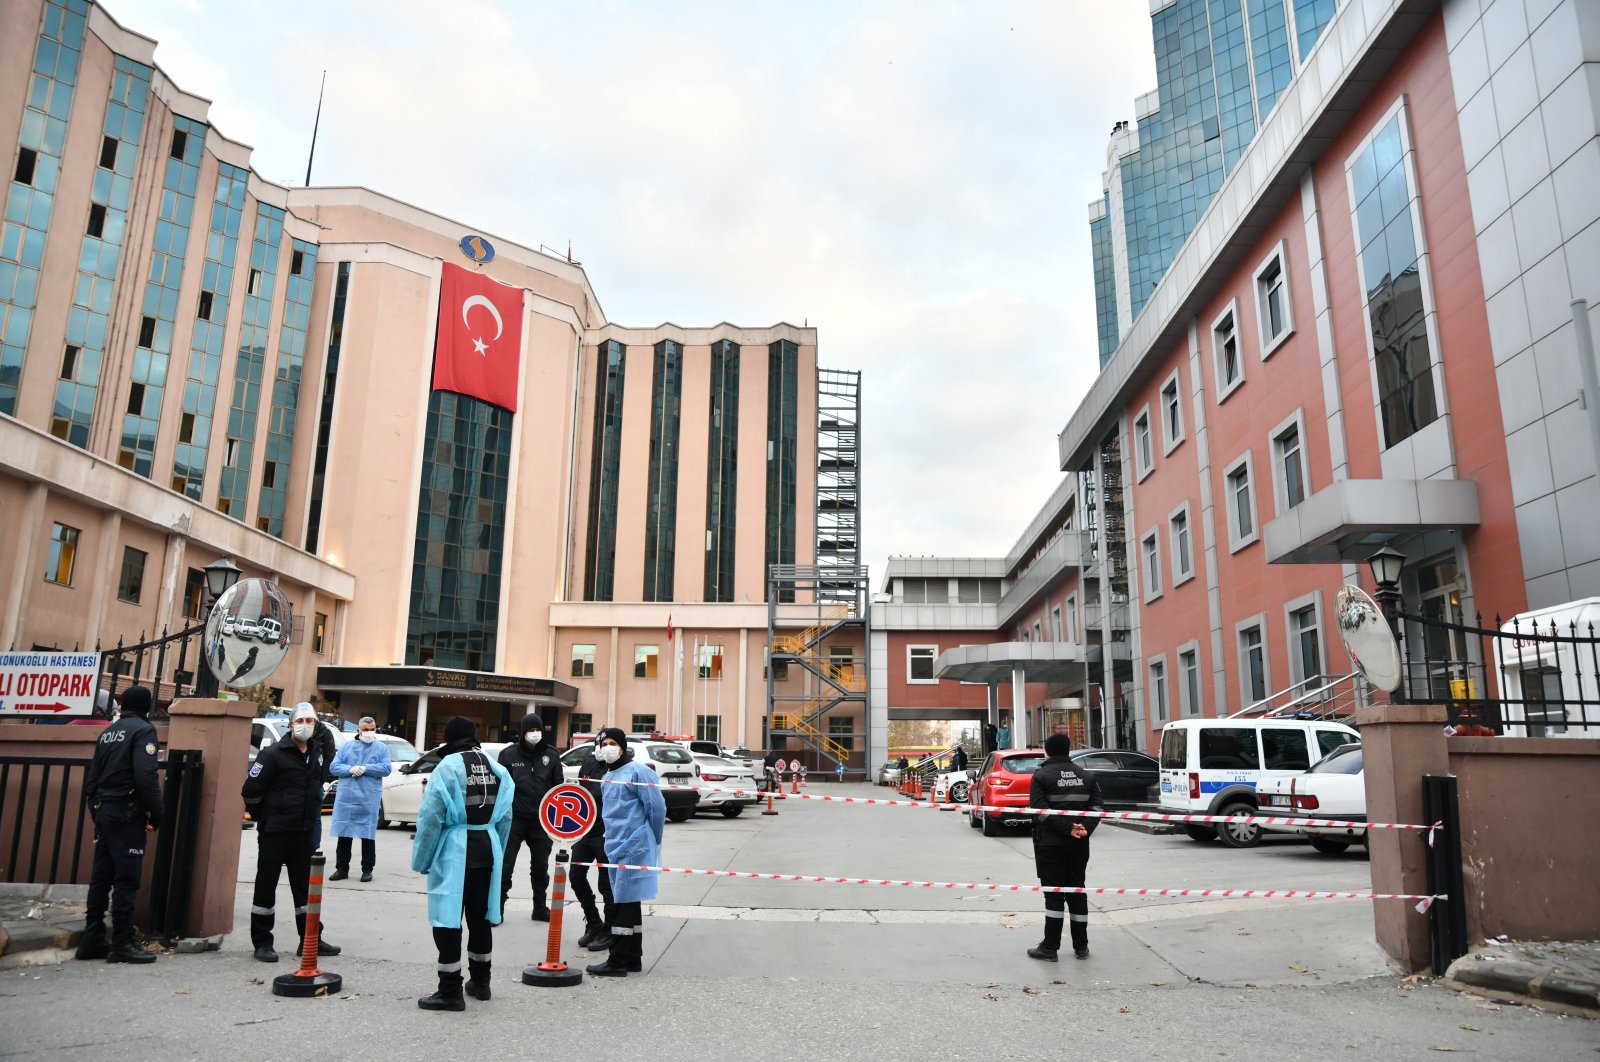 Security personnel stand in front of the SANKO University Hospital following a fire, in Gaziantep, Dec. 19, 2020. (AA Photo)